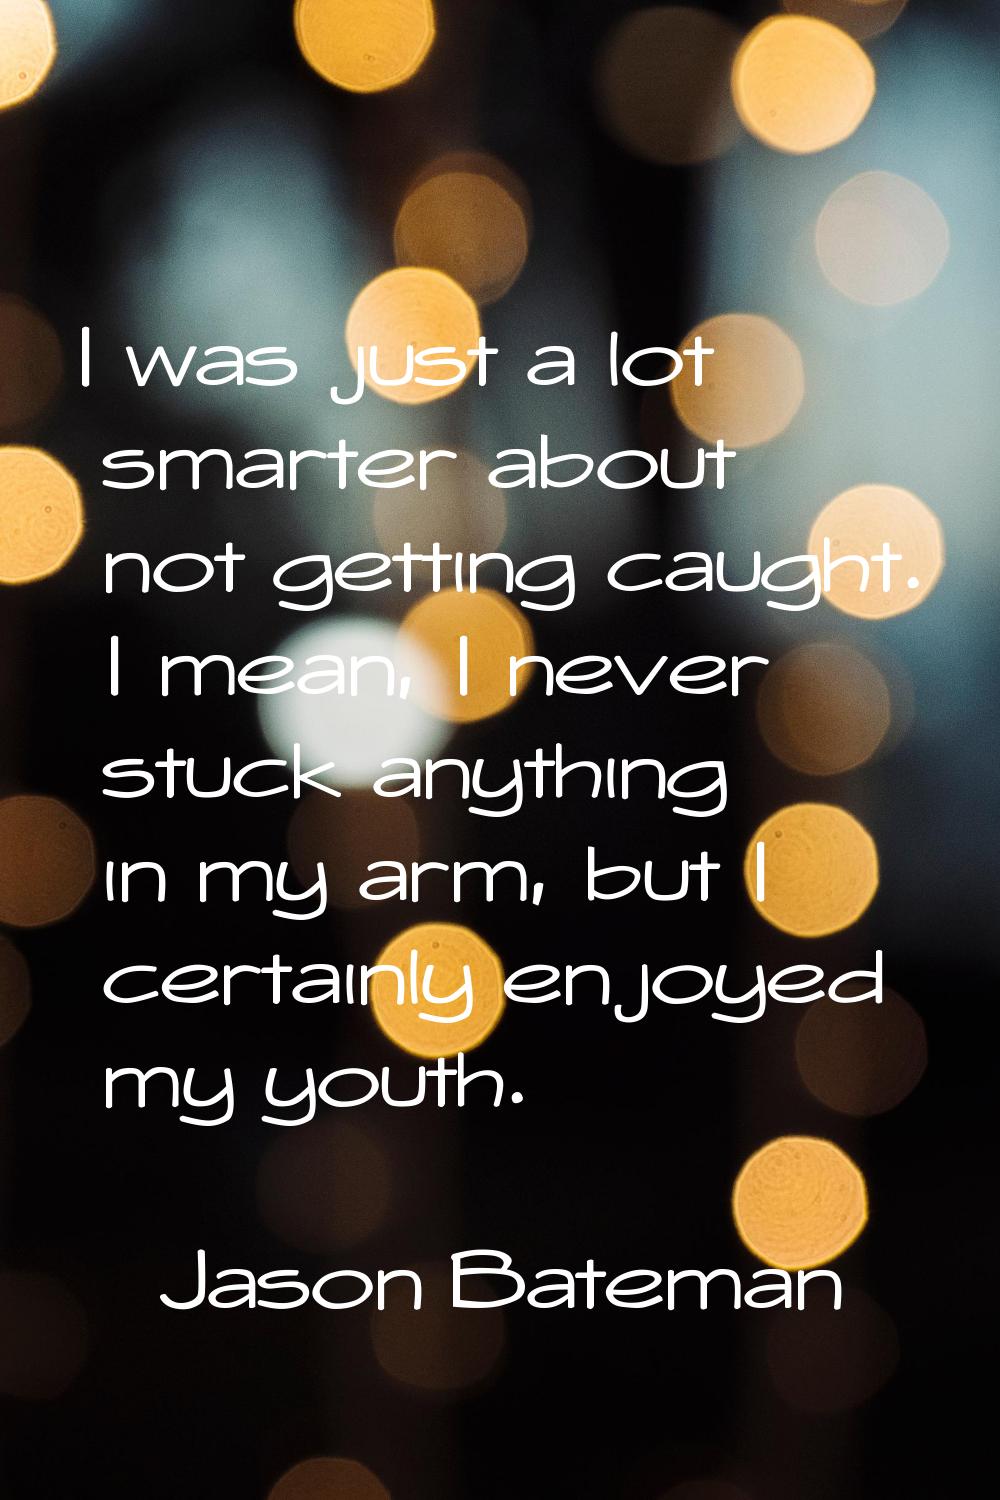 I was just a lot smarter about not getting caught. I mean, I never stuck anything in my arm, but I 